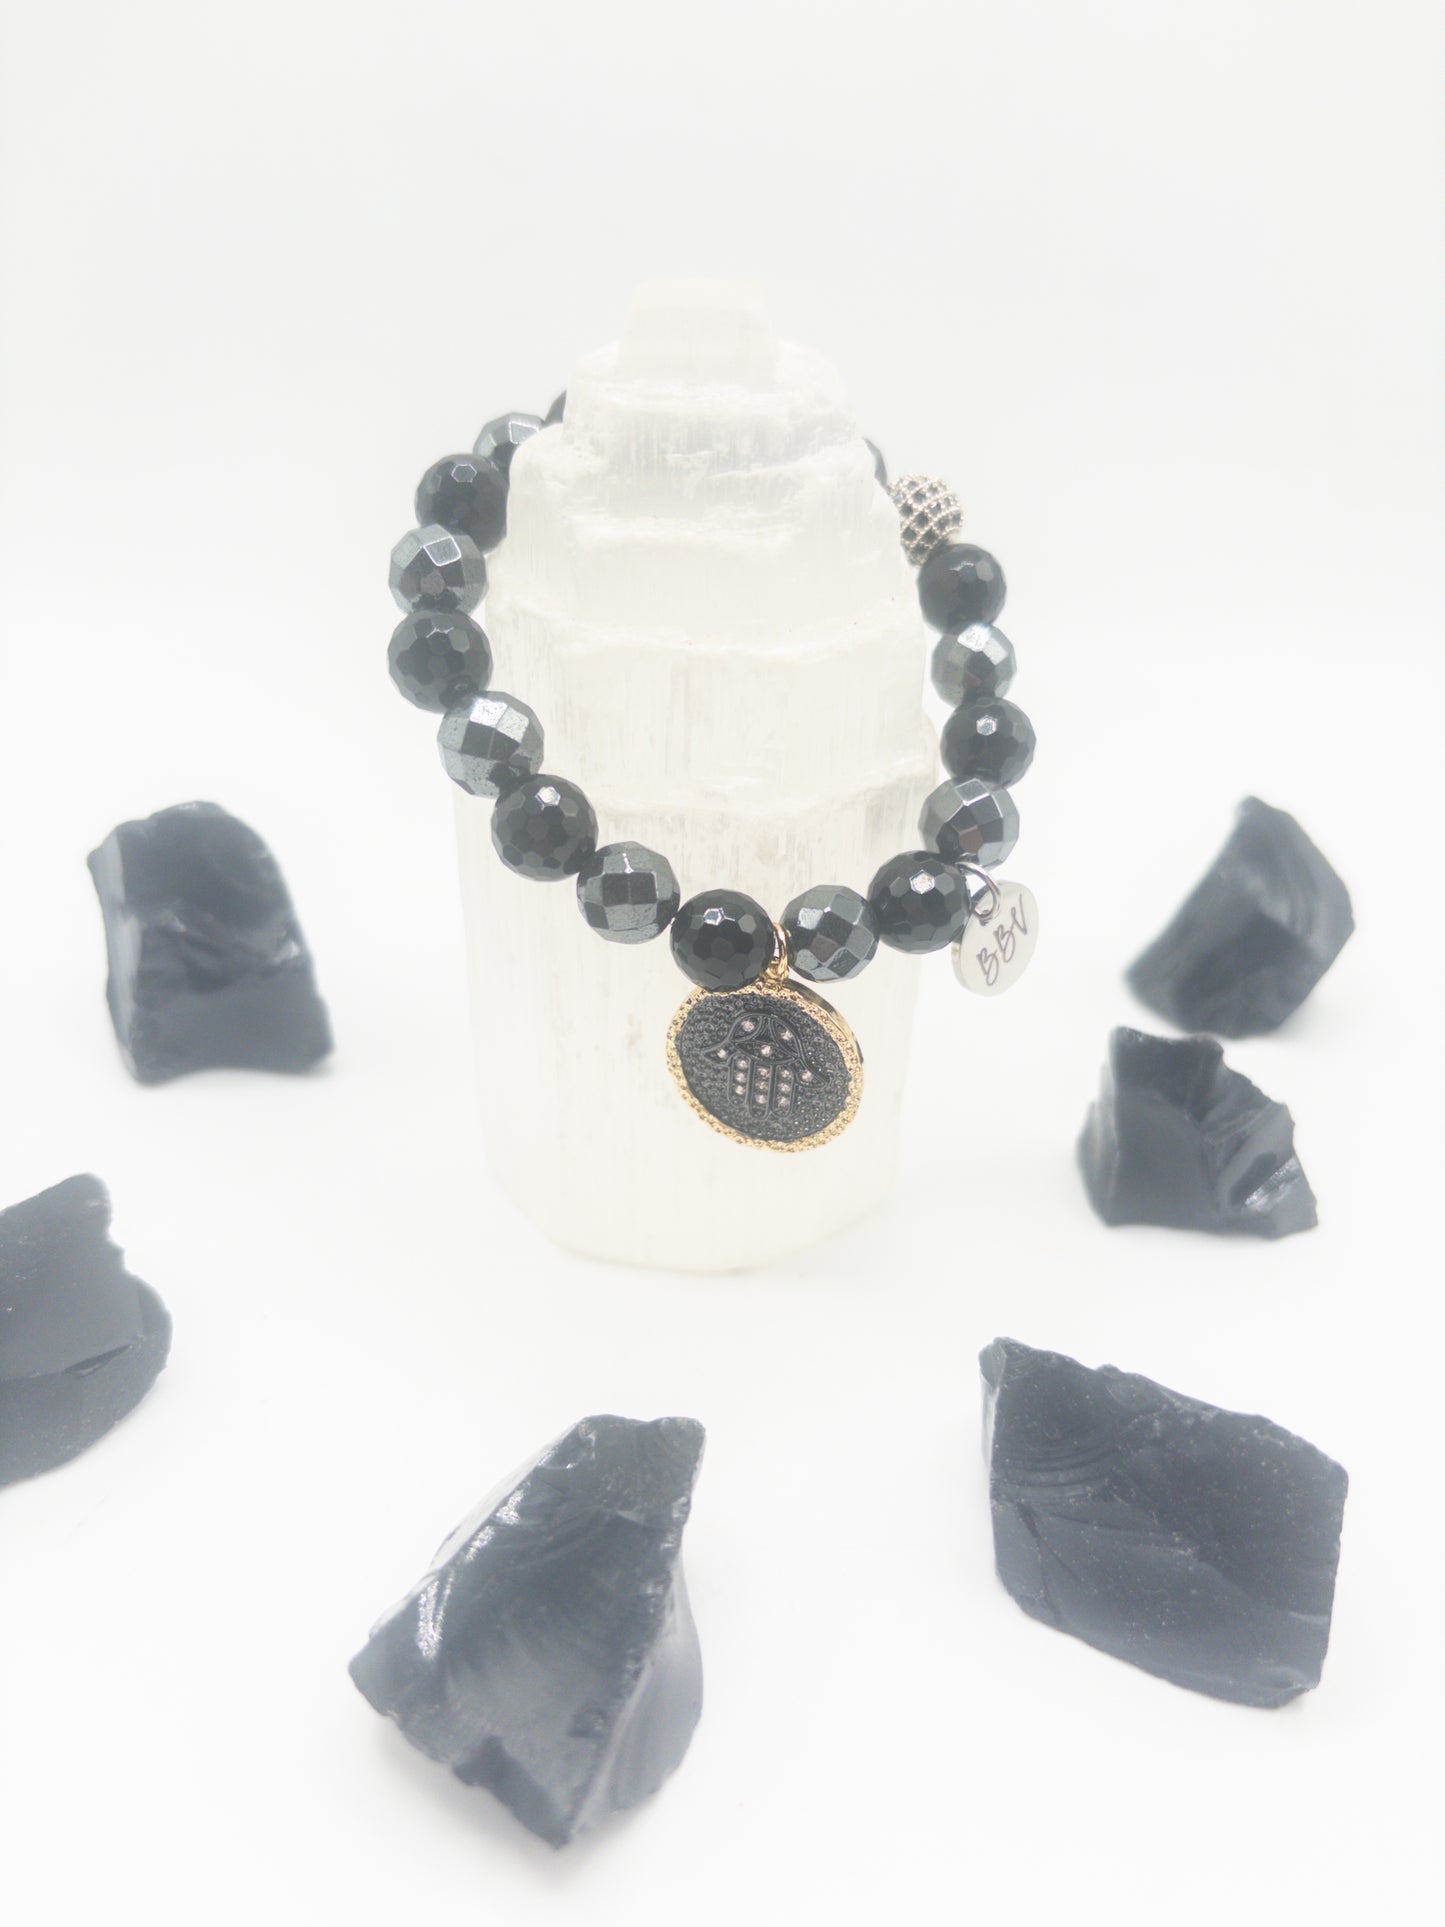 Faceted Hematite & Black Onyx Crystal Bracelet With Charm